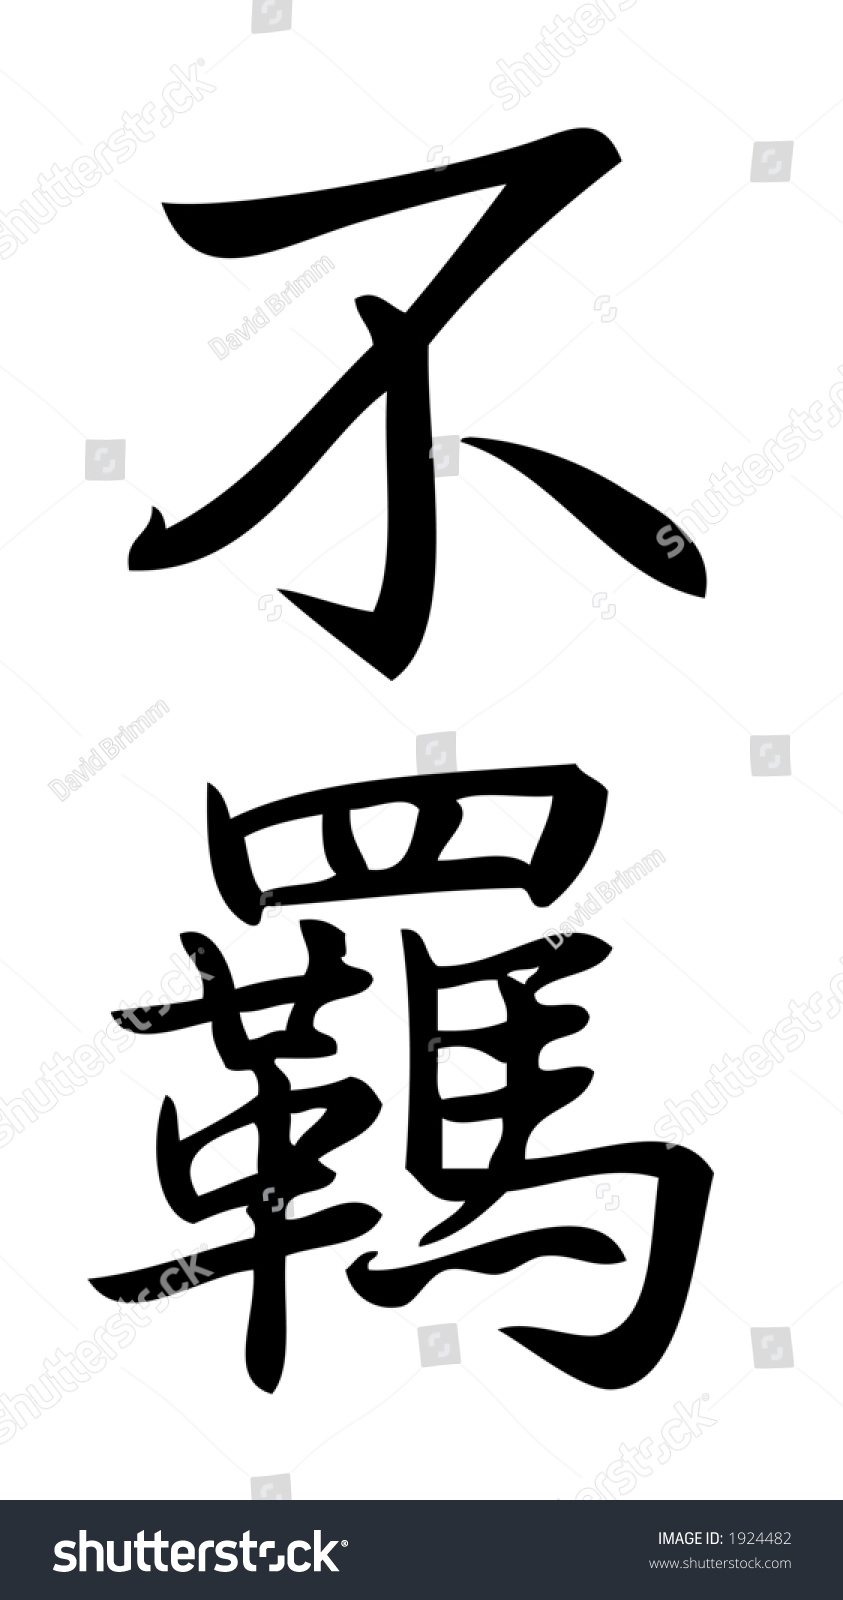 kanji-character-for-freedom-independence-kanji-are-chinese